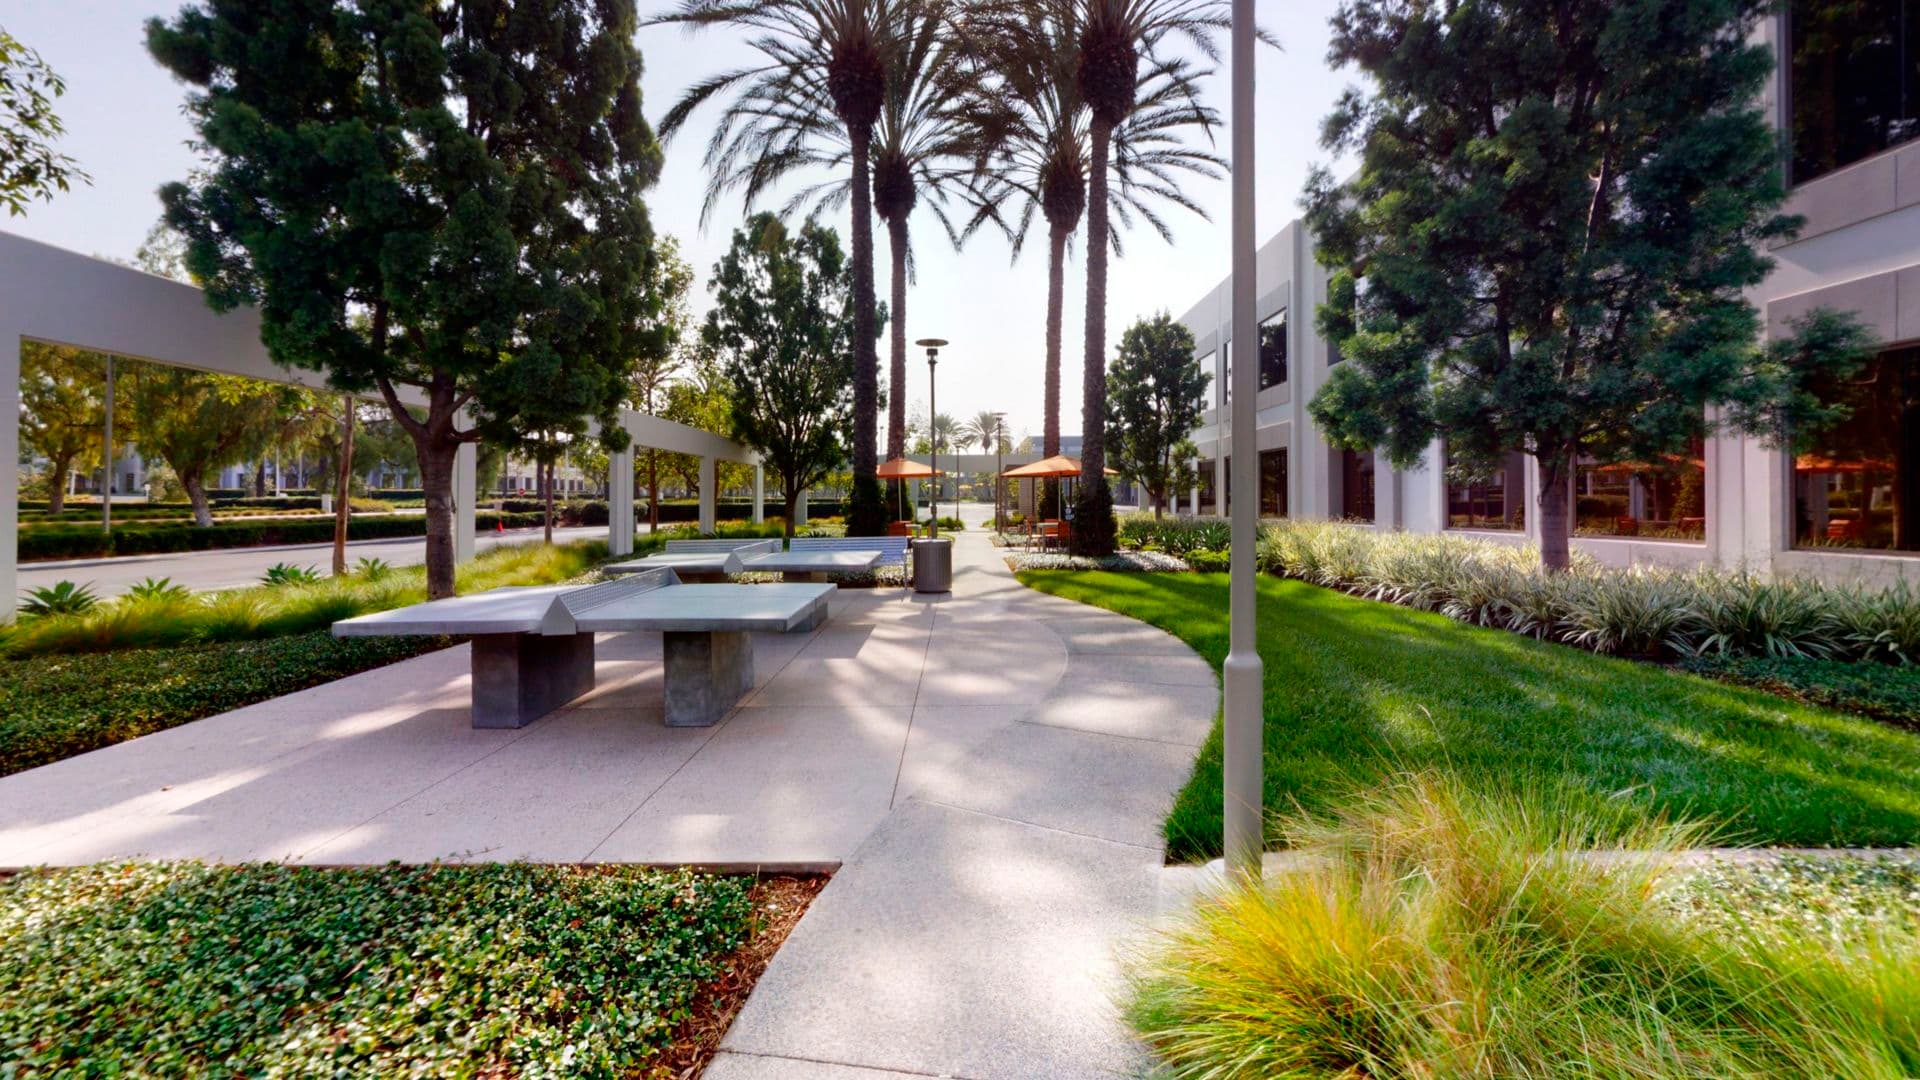 Exterior photography of Outdoor Workspac330 Commerce at Market Place Center, Irvine CA.